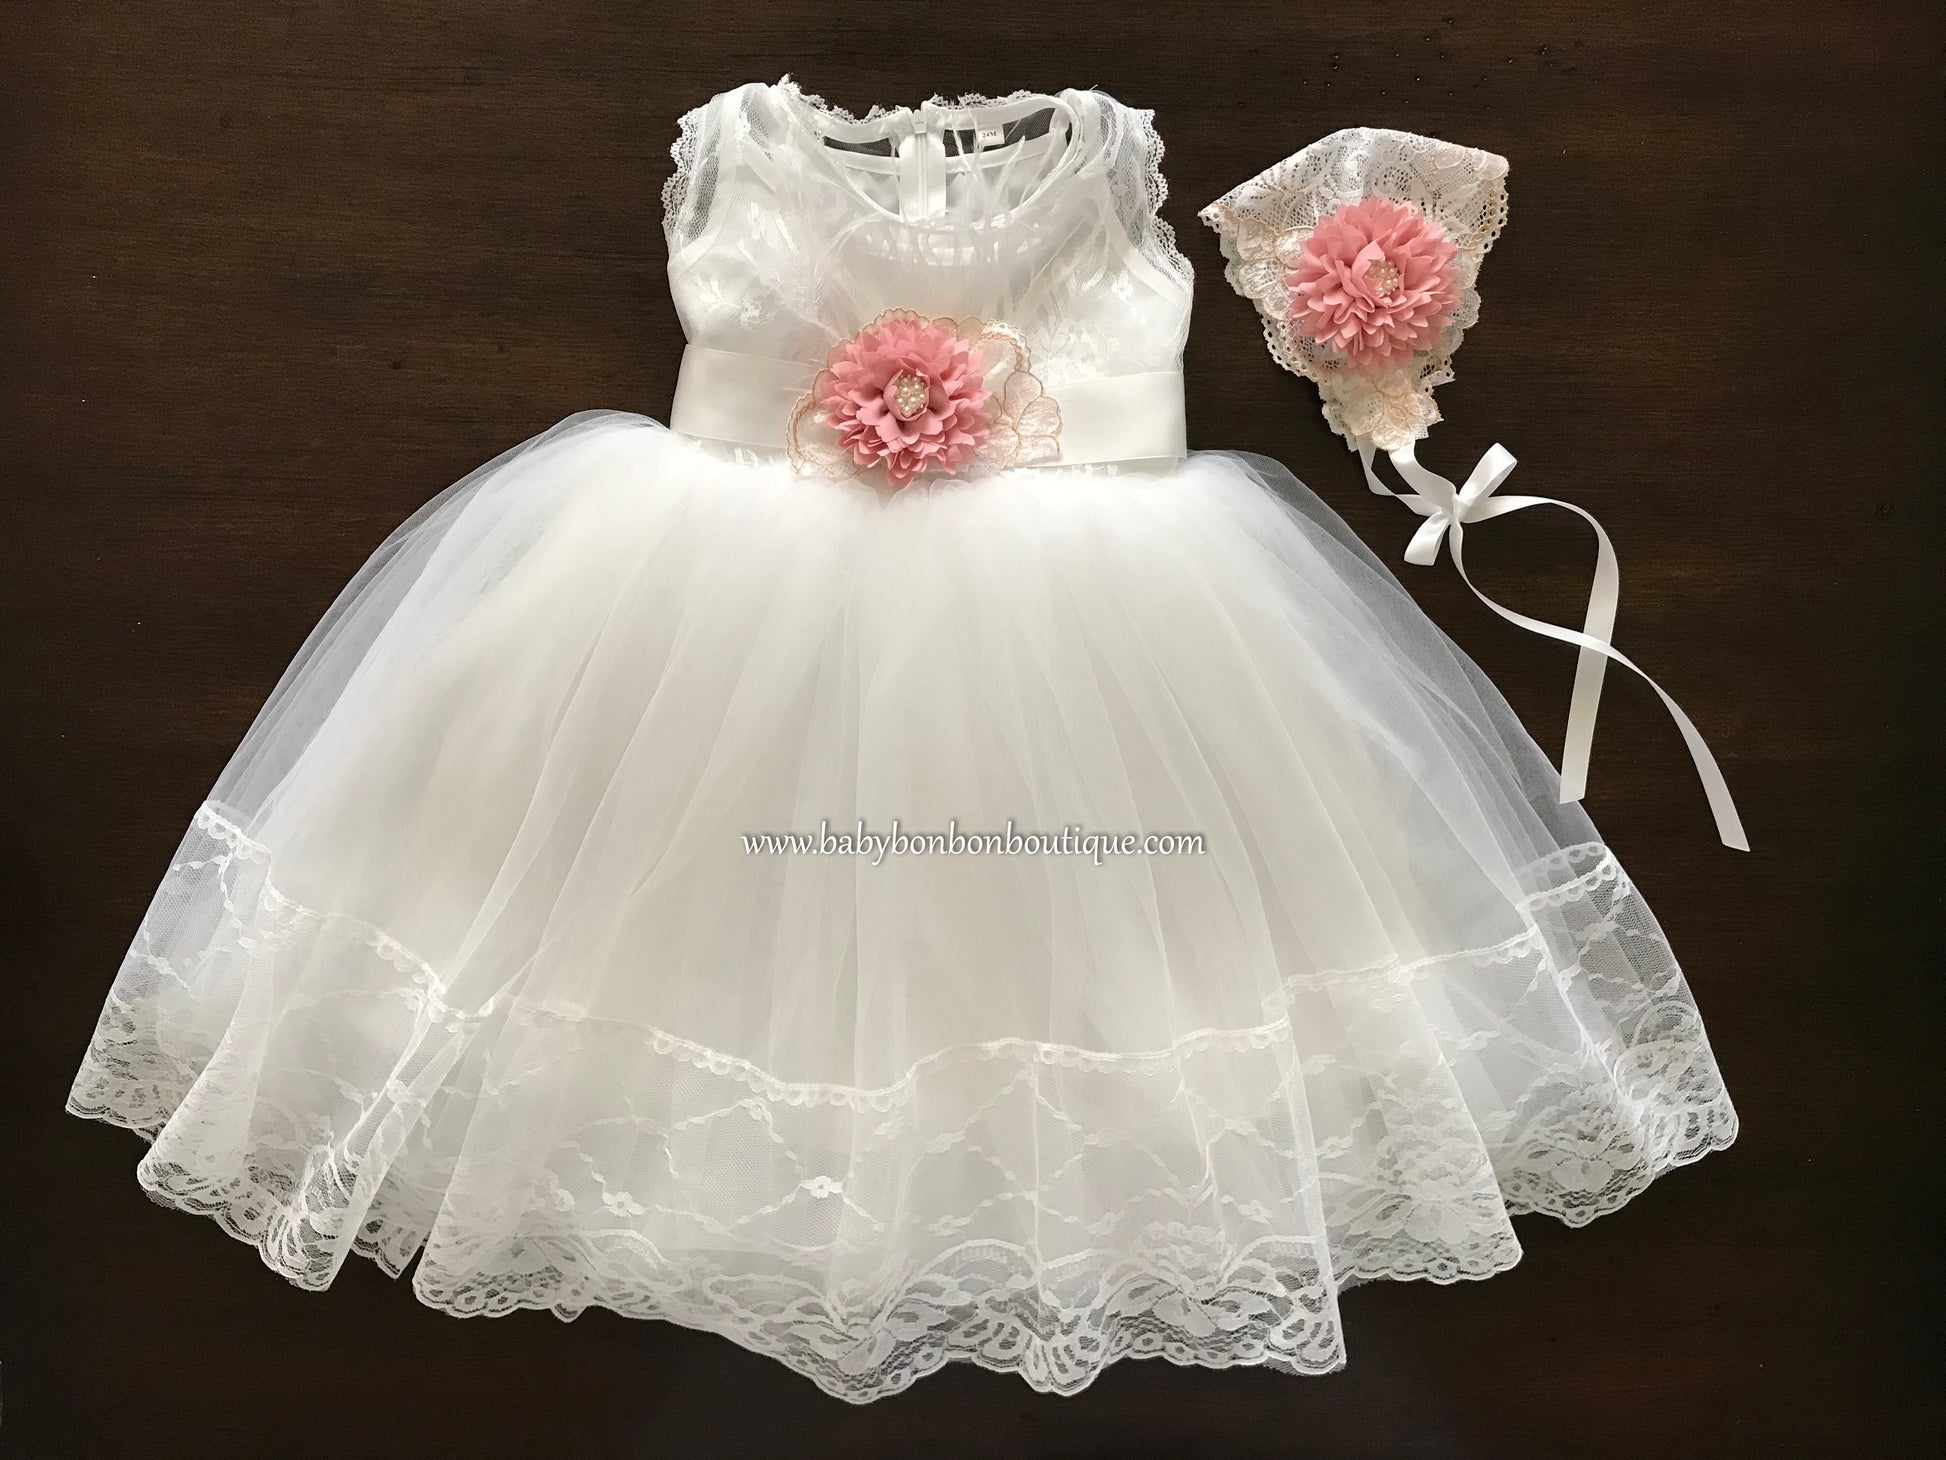 White Baptism Dress with Pink Flower Bonnet and Sash